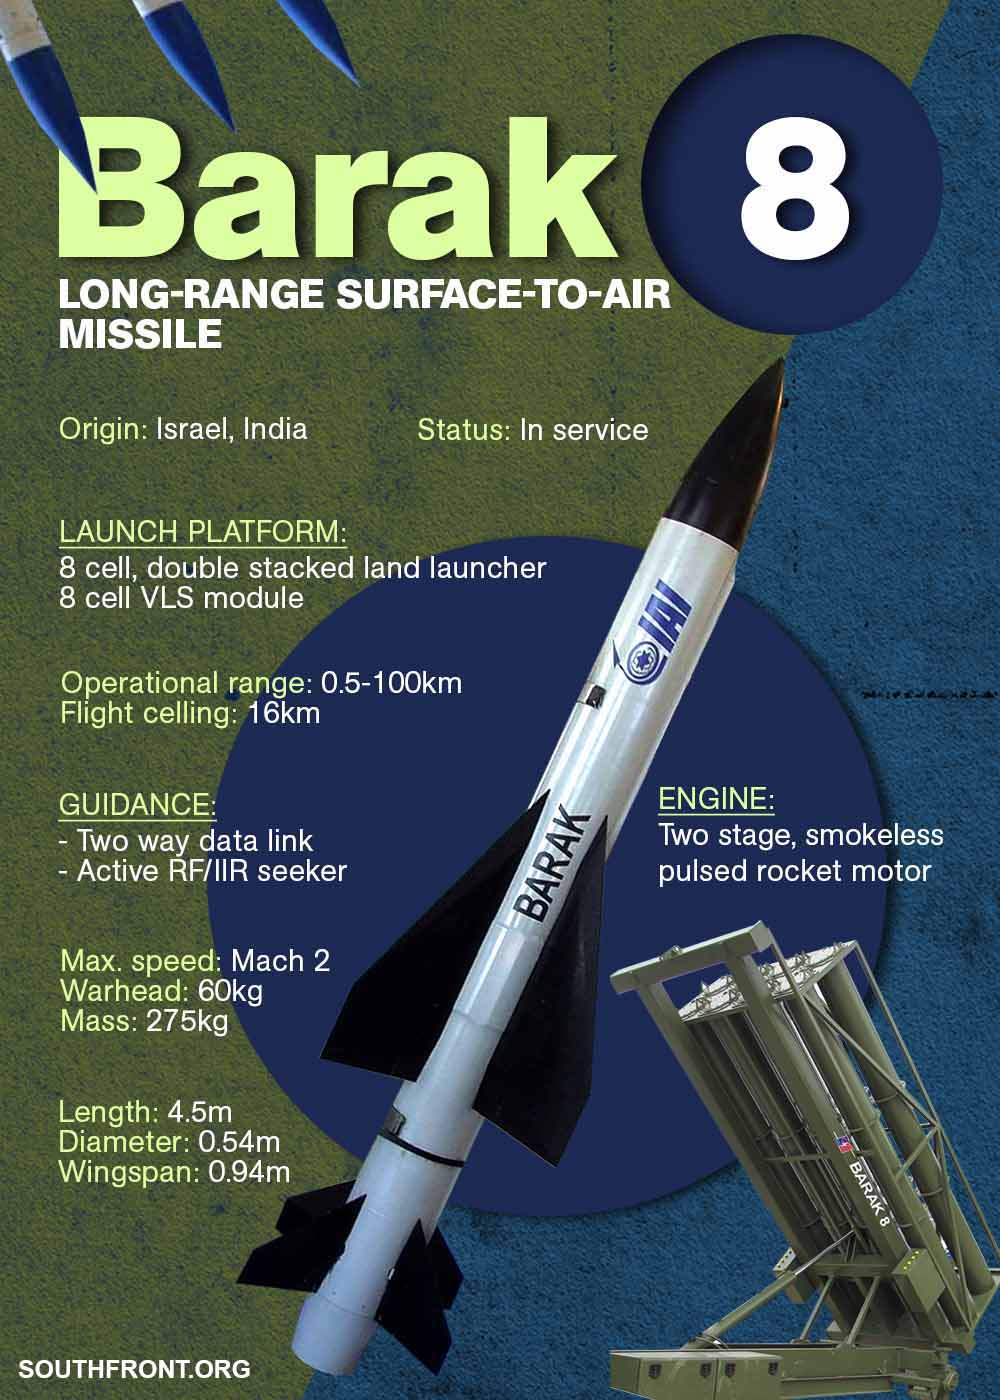 Morocco Will Buy Loads Of Israeli Weapons, Including Barak-8 Long-Range Air-Defense System